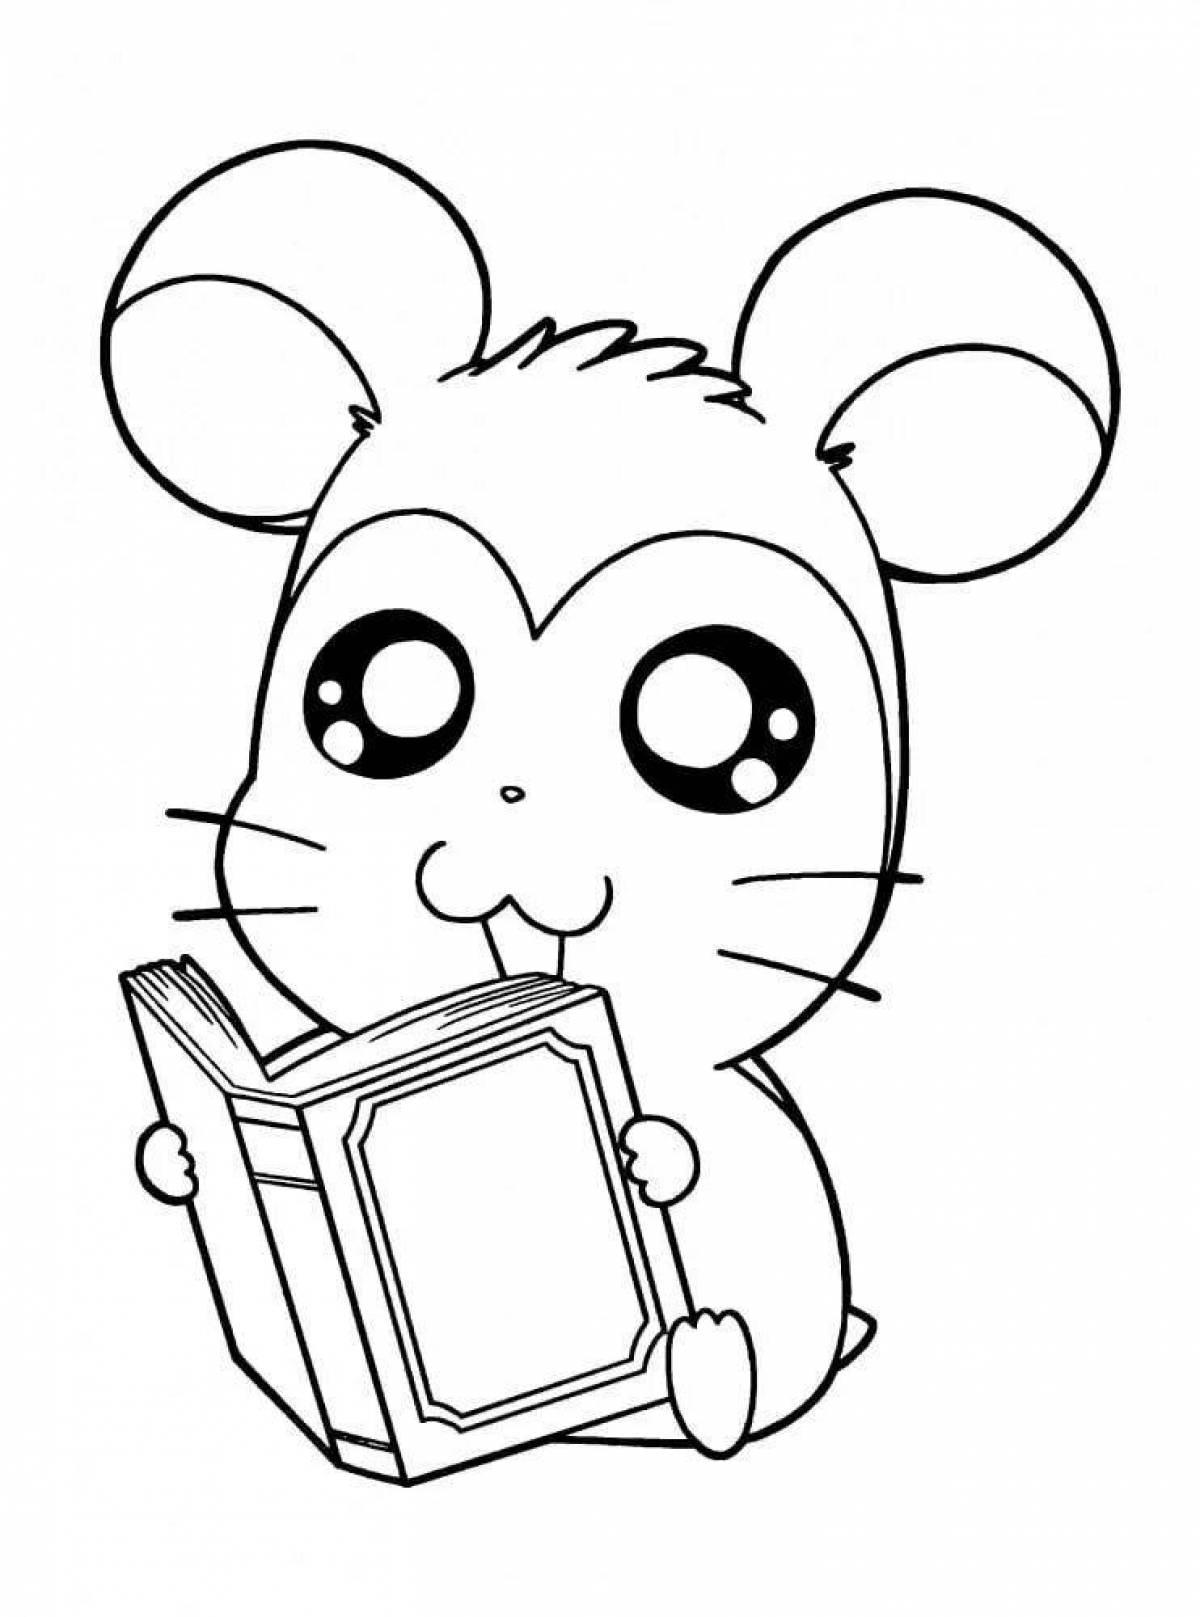 Adorable hamster coloring games